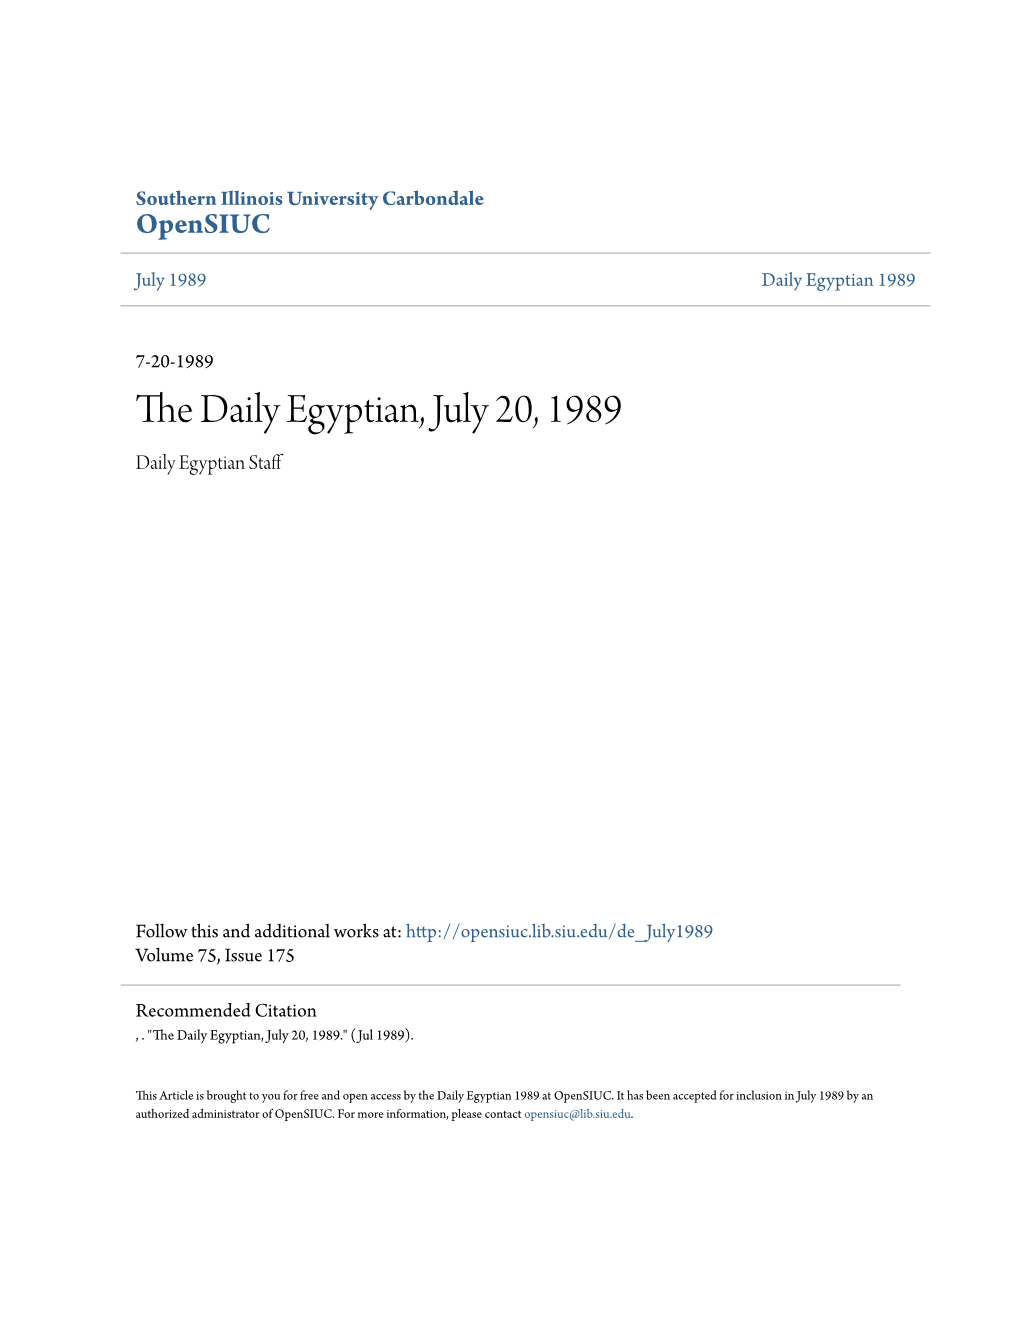 The Daily Egyptian, July 20, 1989